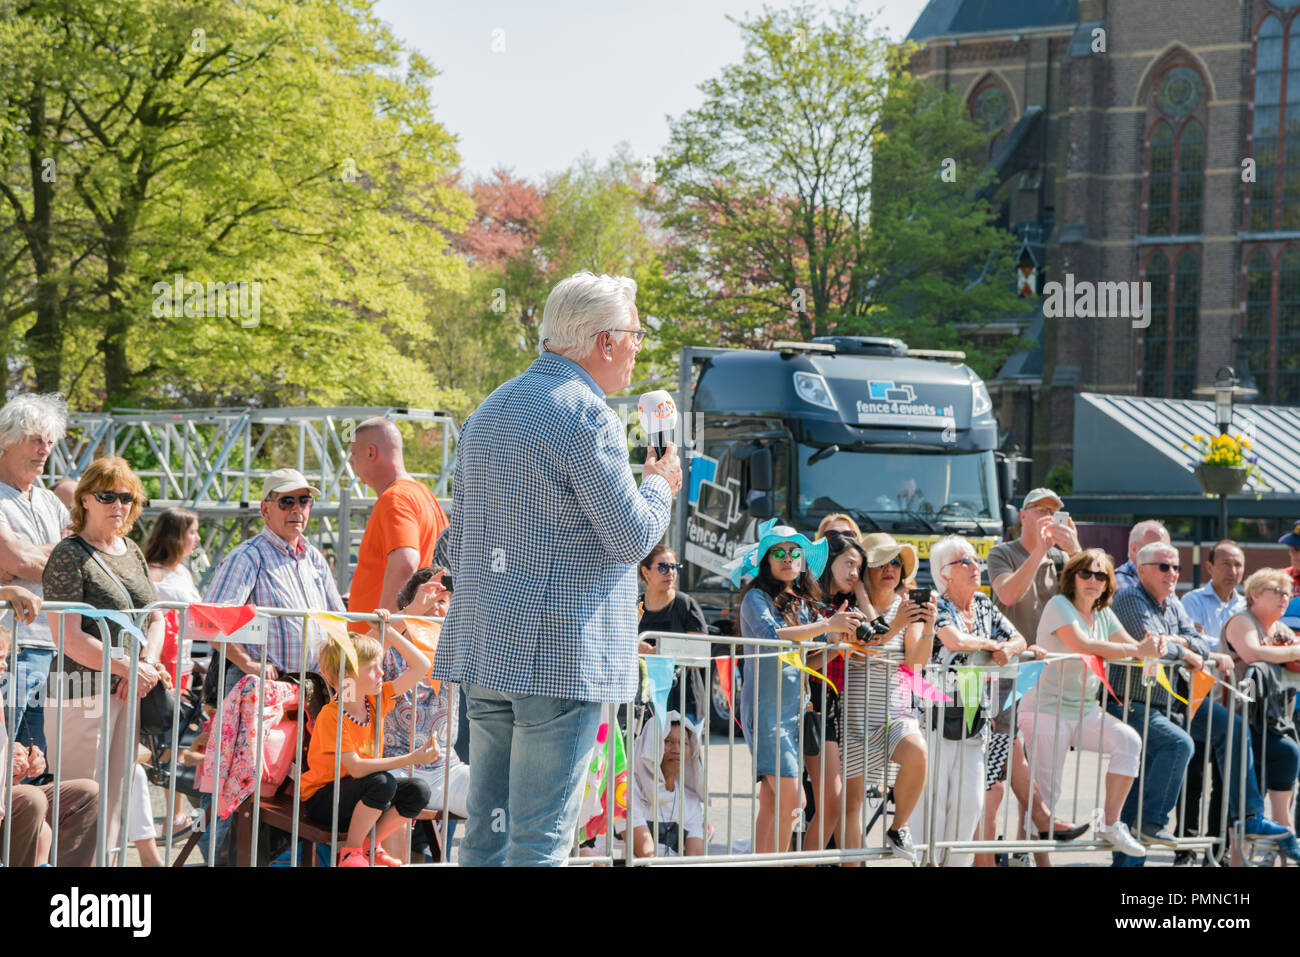 Lisse, APR 21: People waiting for the famous flower parade on APR 21, 2018 at Lisse, Netherlands Stock Photo